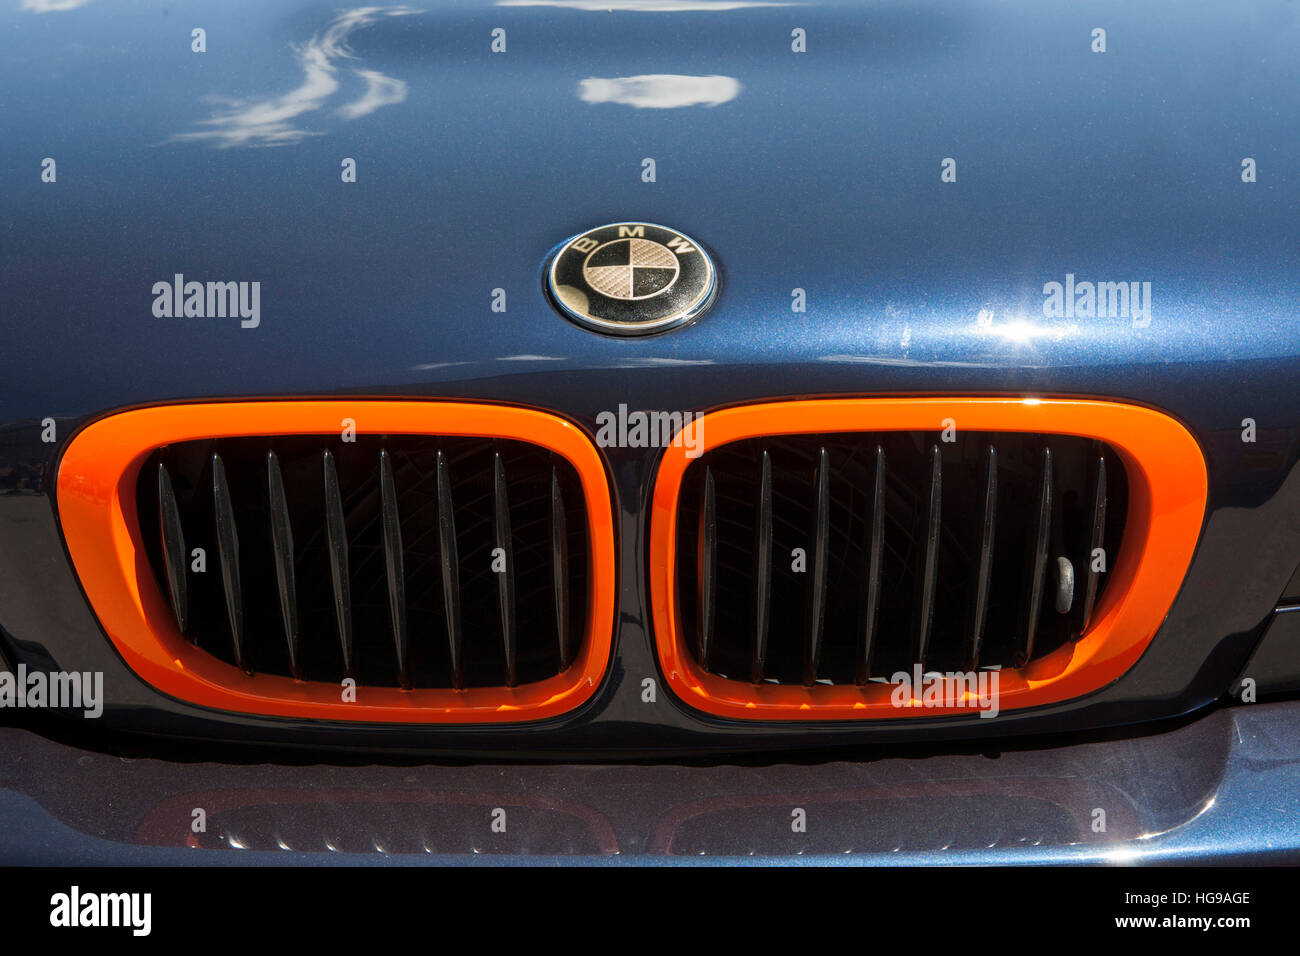 Car tuning show, front view, BMW Stock Photo